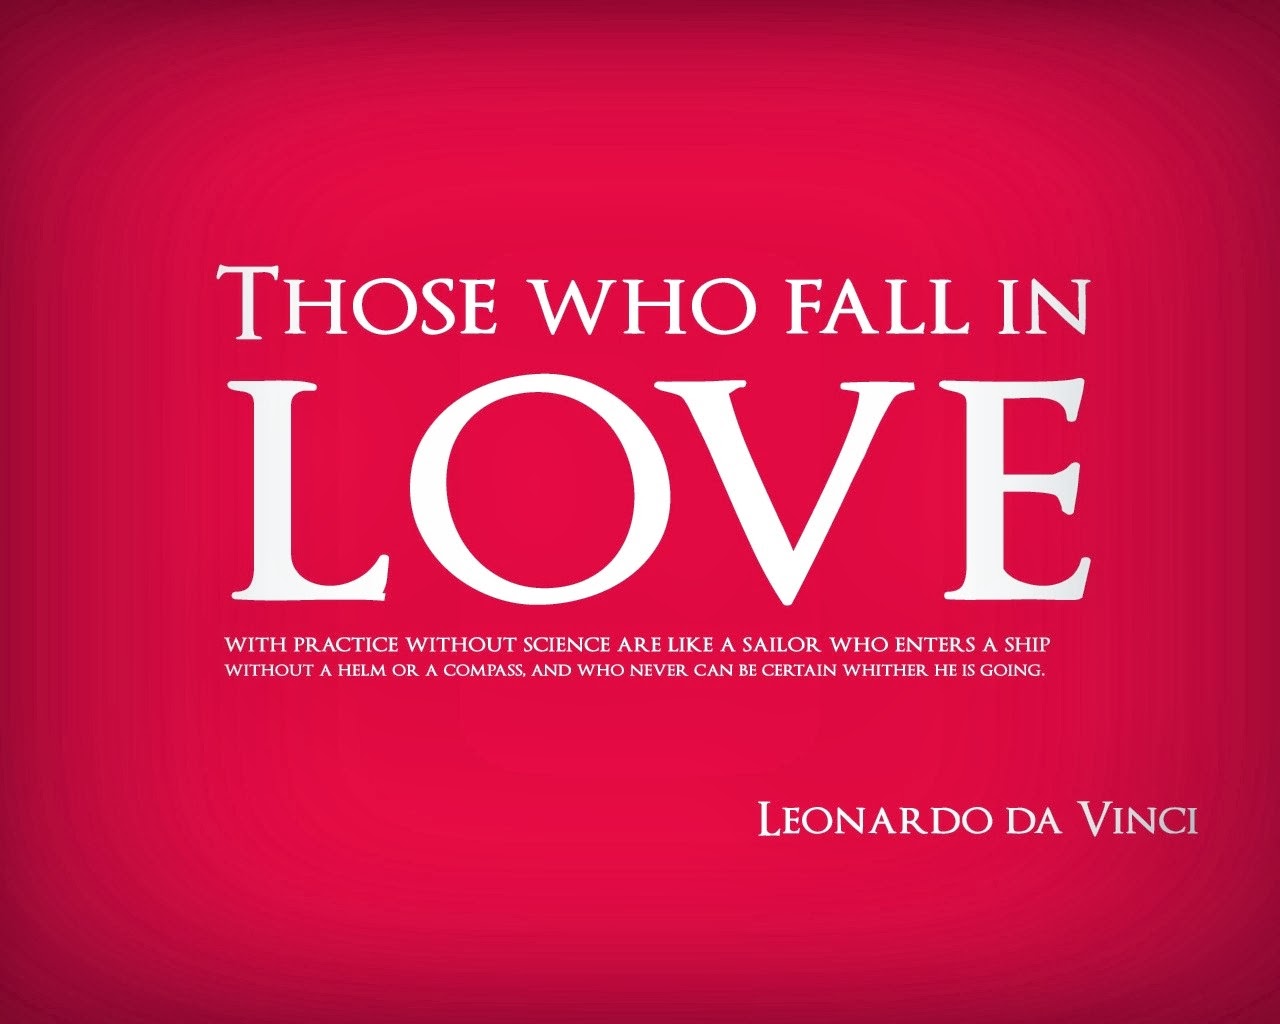 "Those Who Fall in Love